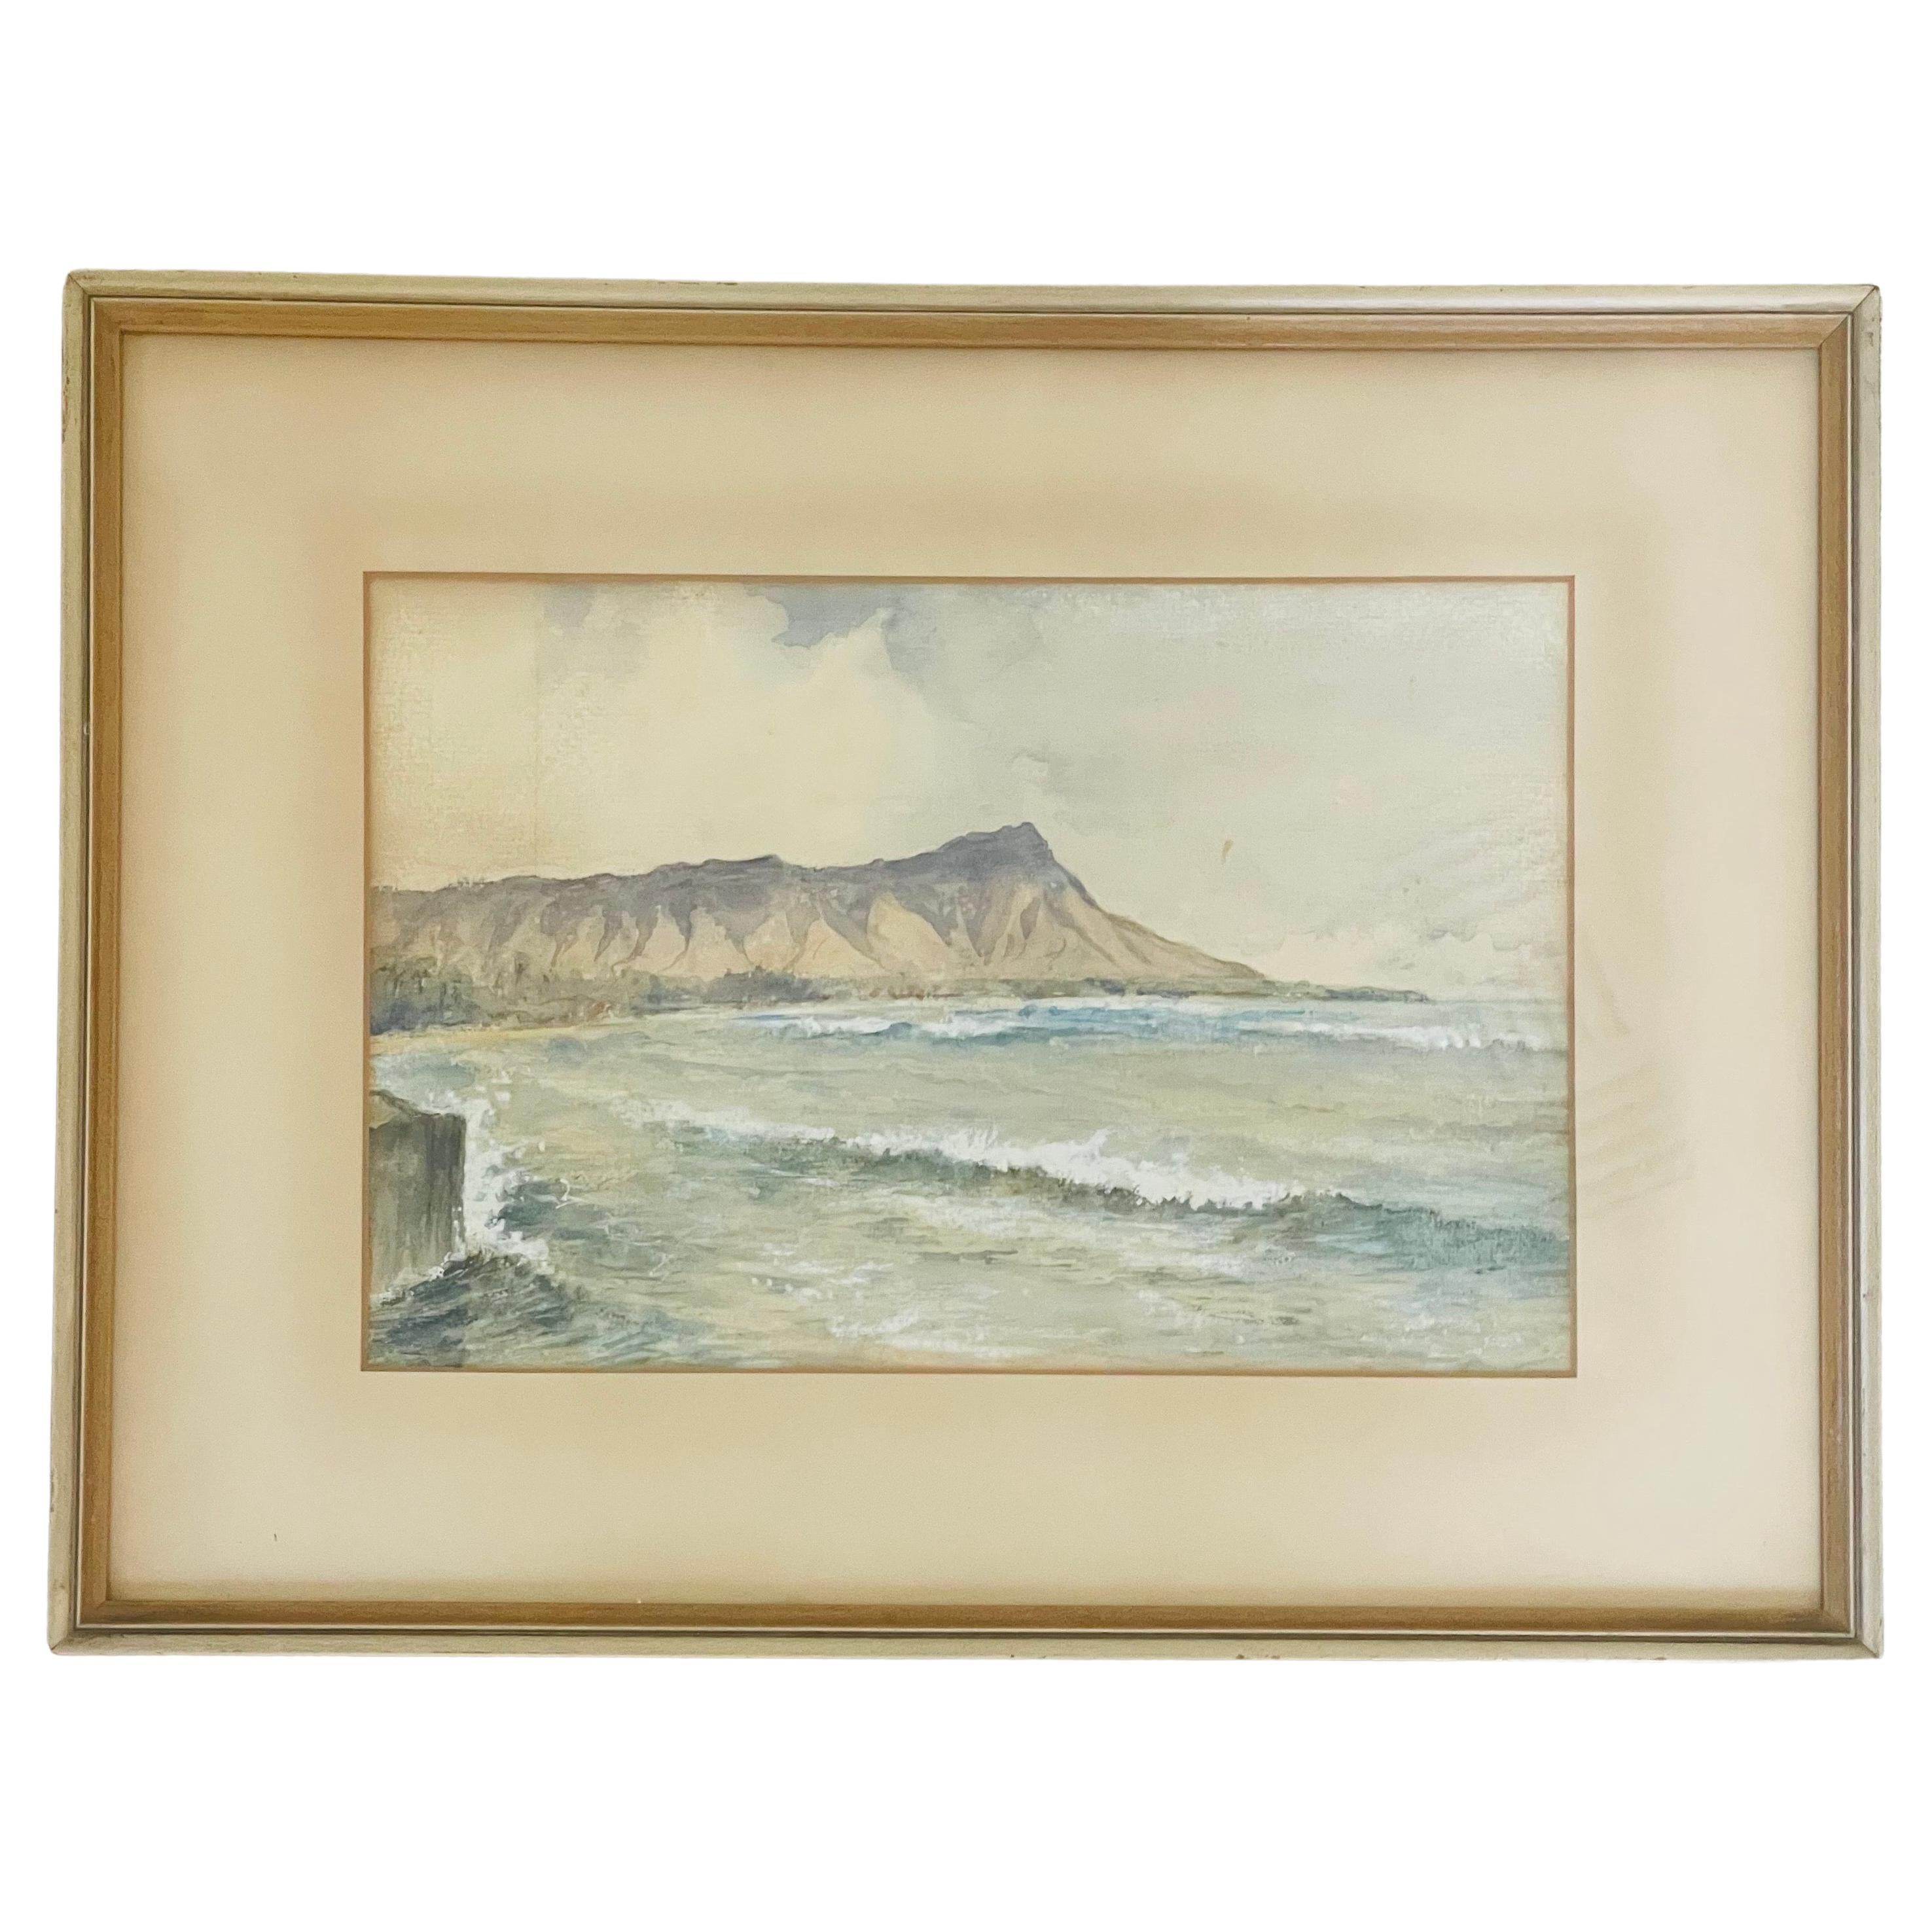 Original Watercolor on Board Painting Entitled "Diamond Head 1893" Great Story For Sale